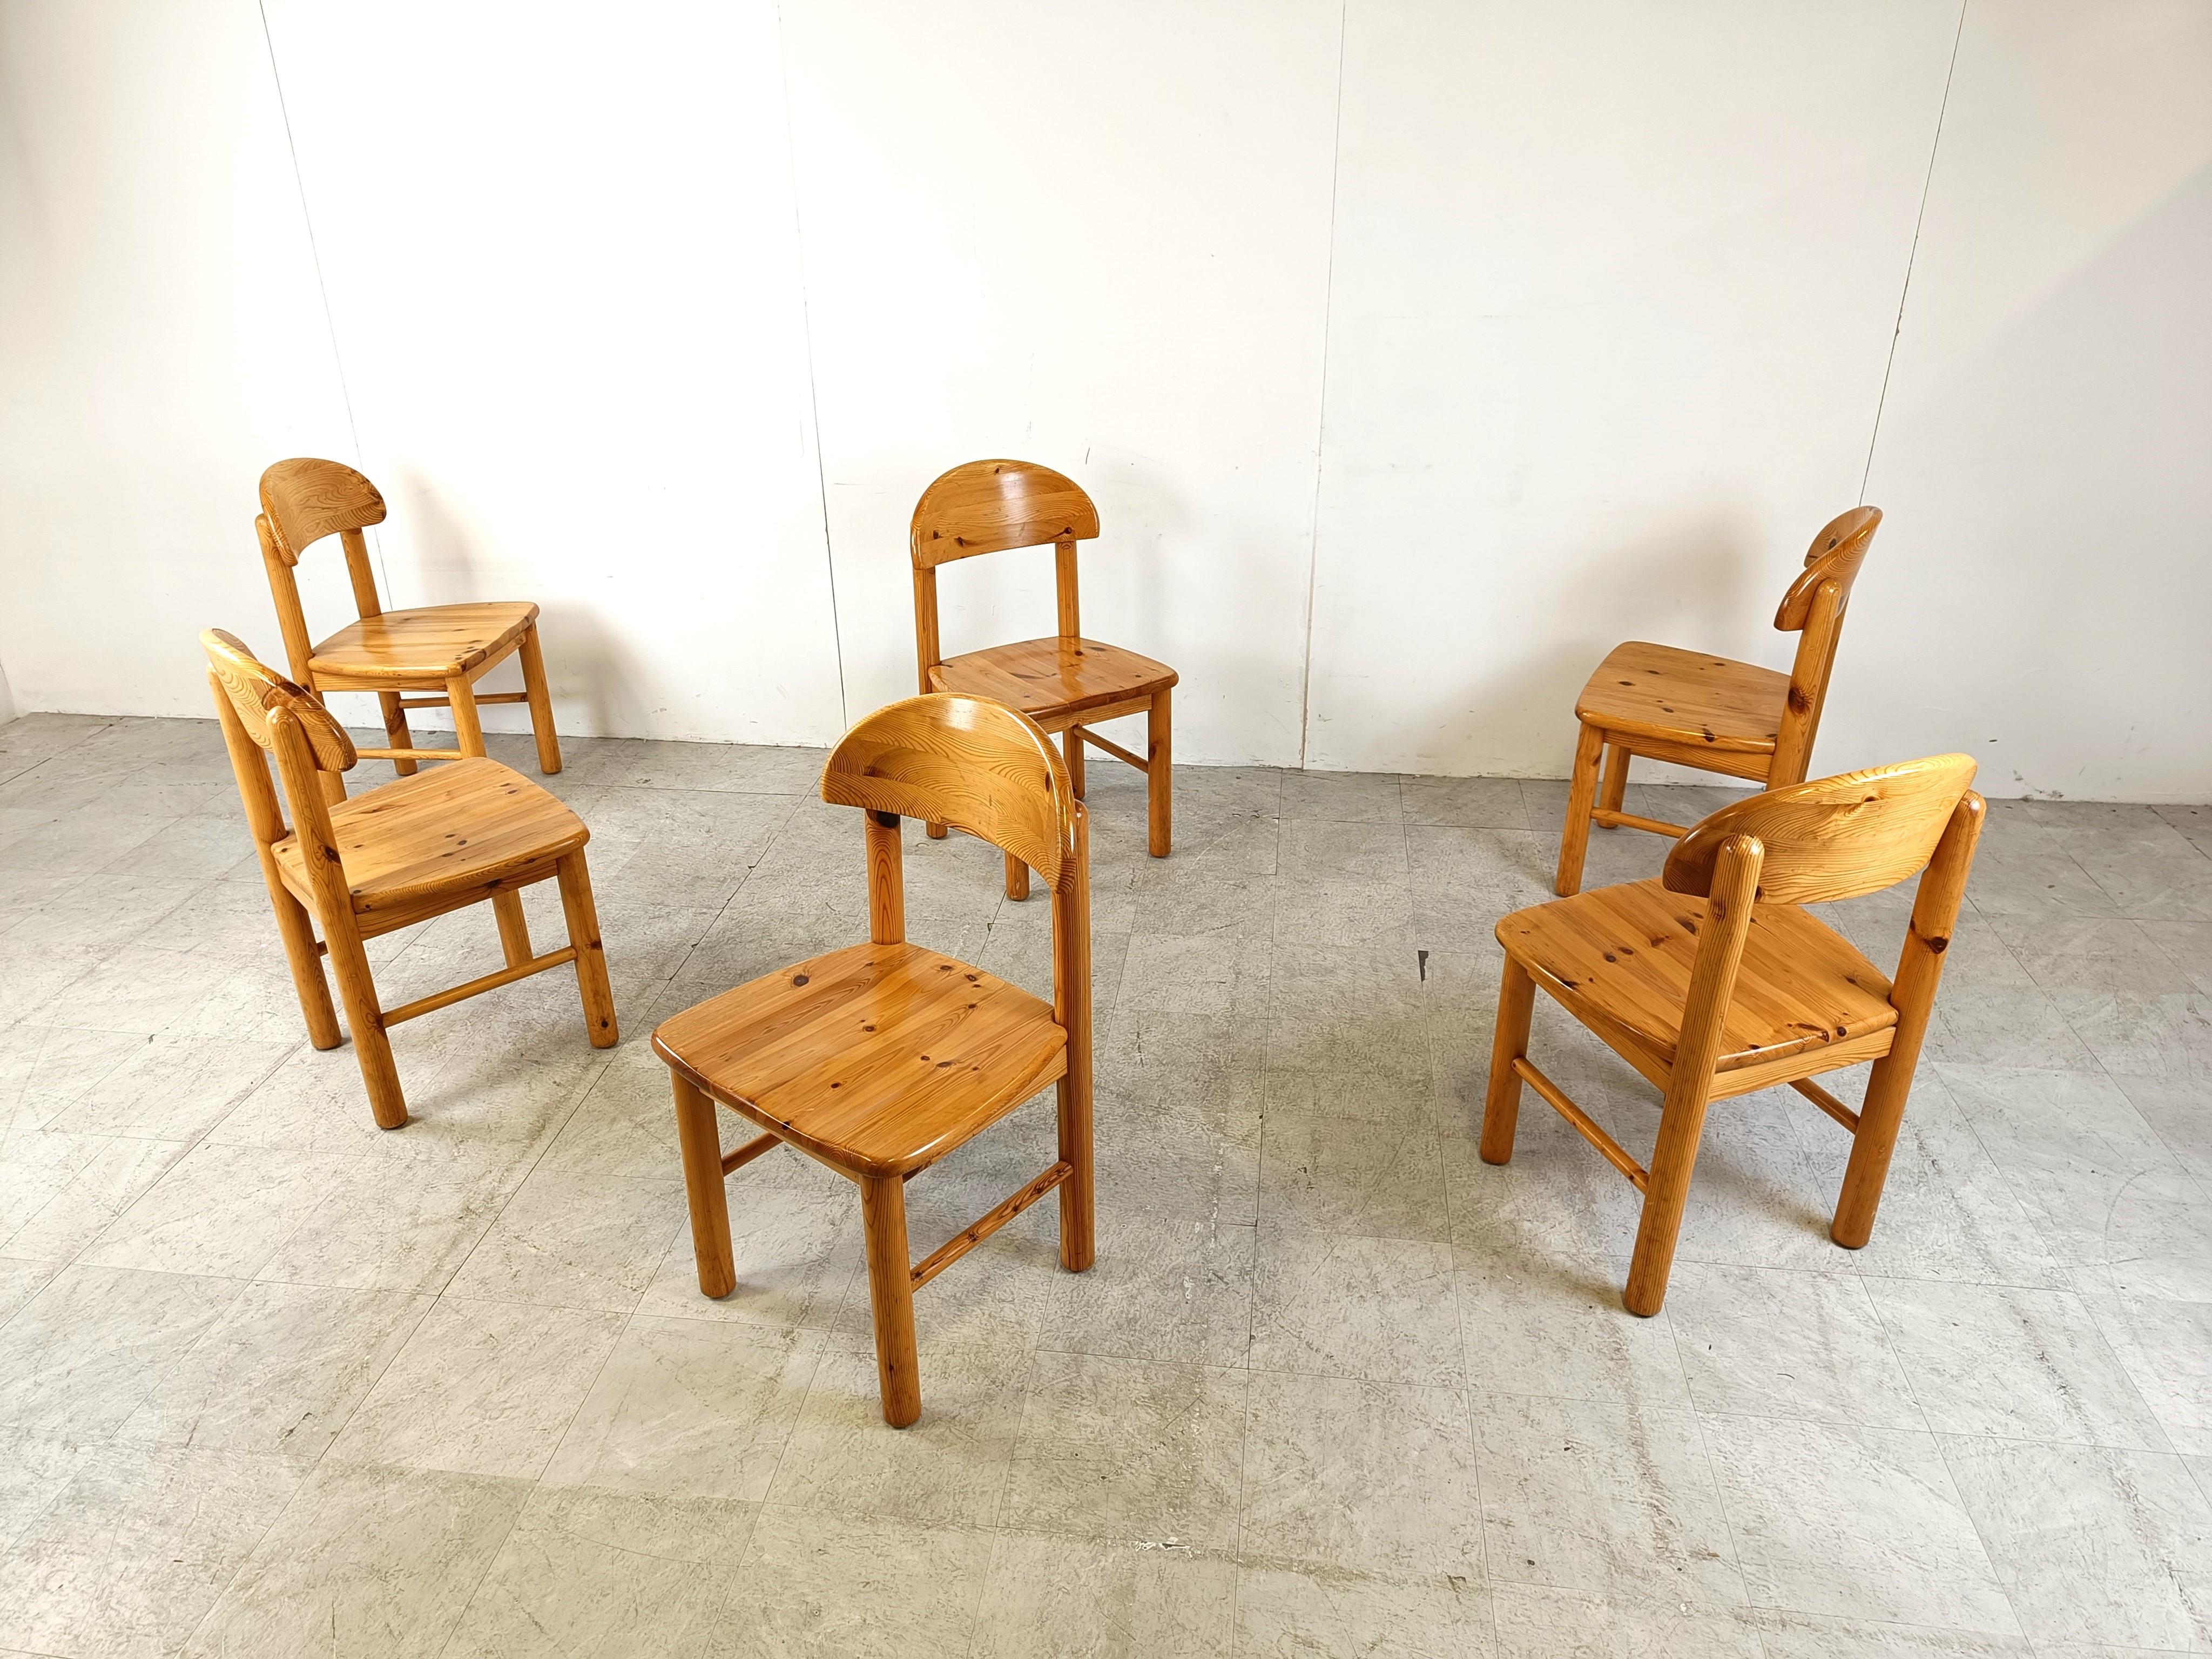 Danish Vintage pine wood dining chairs, 1980s - set of 6 